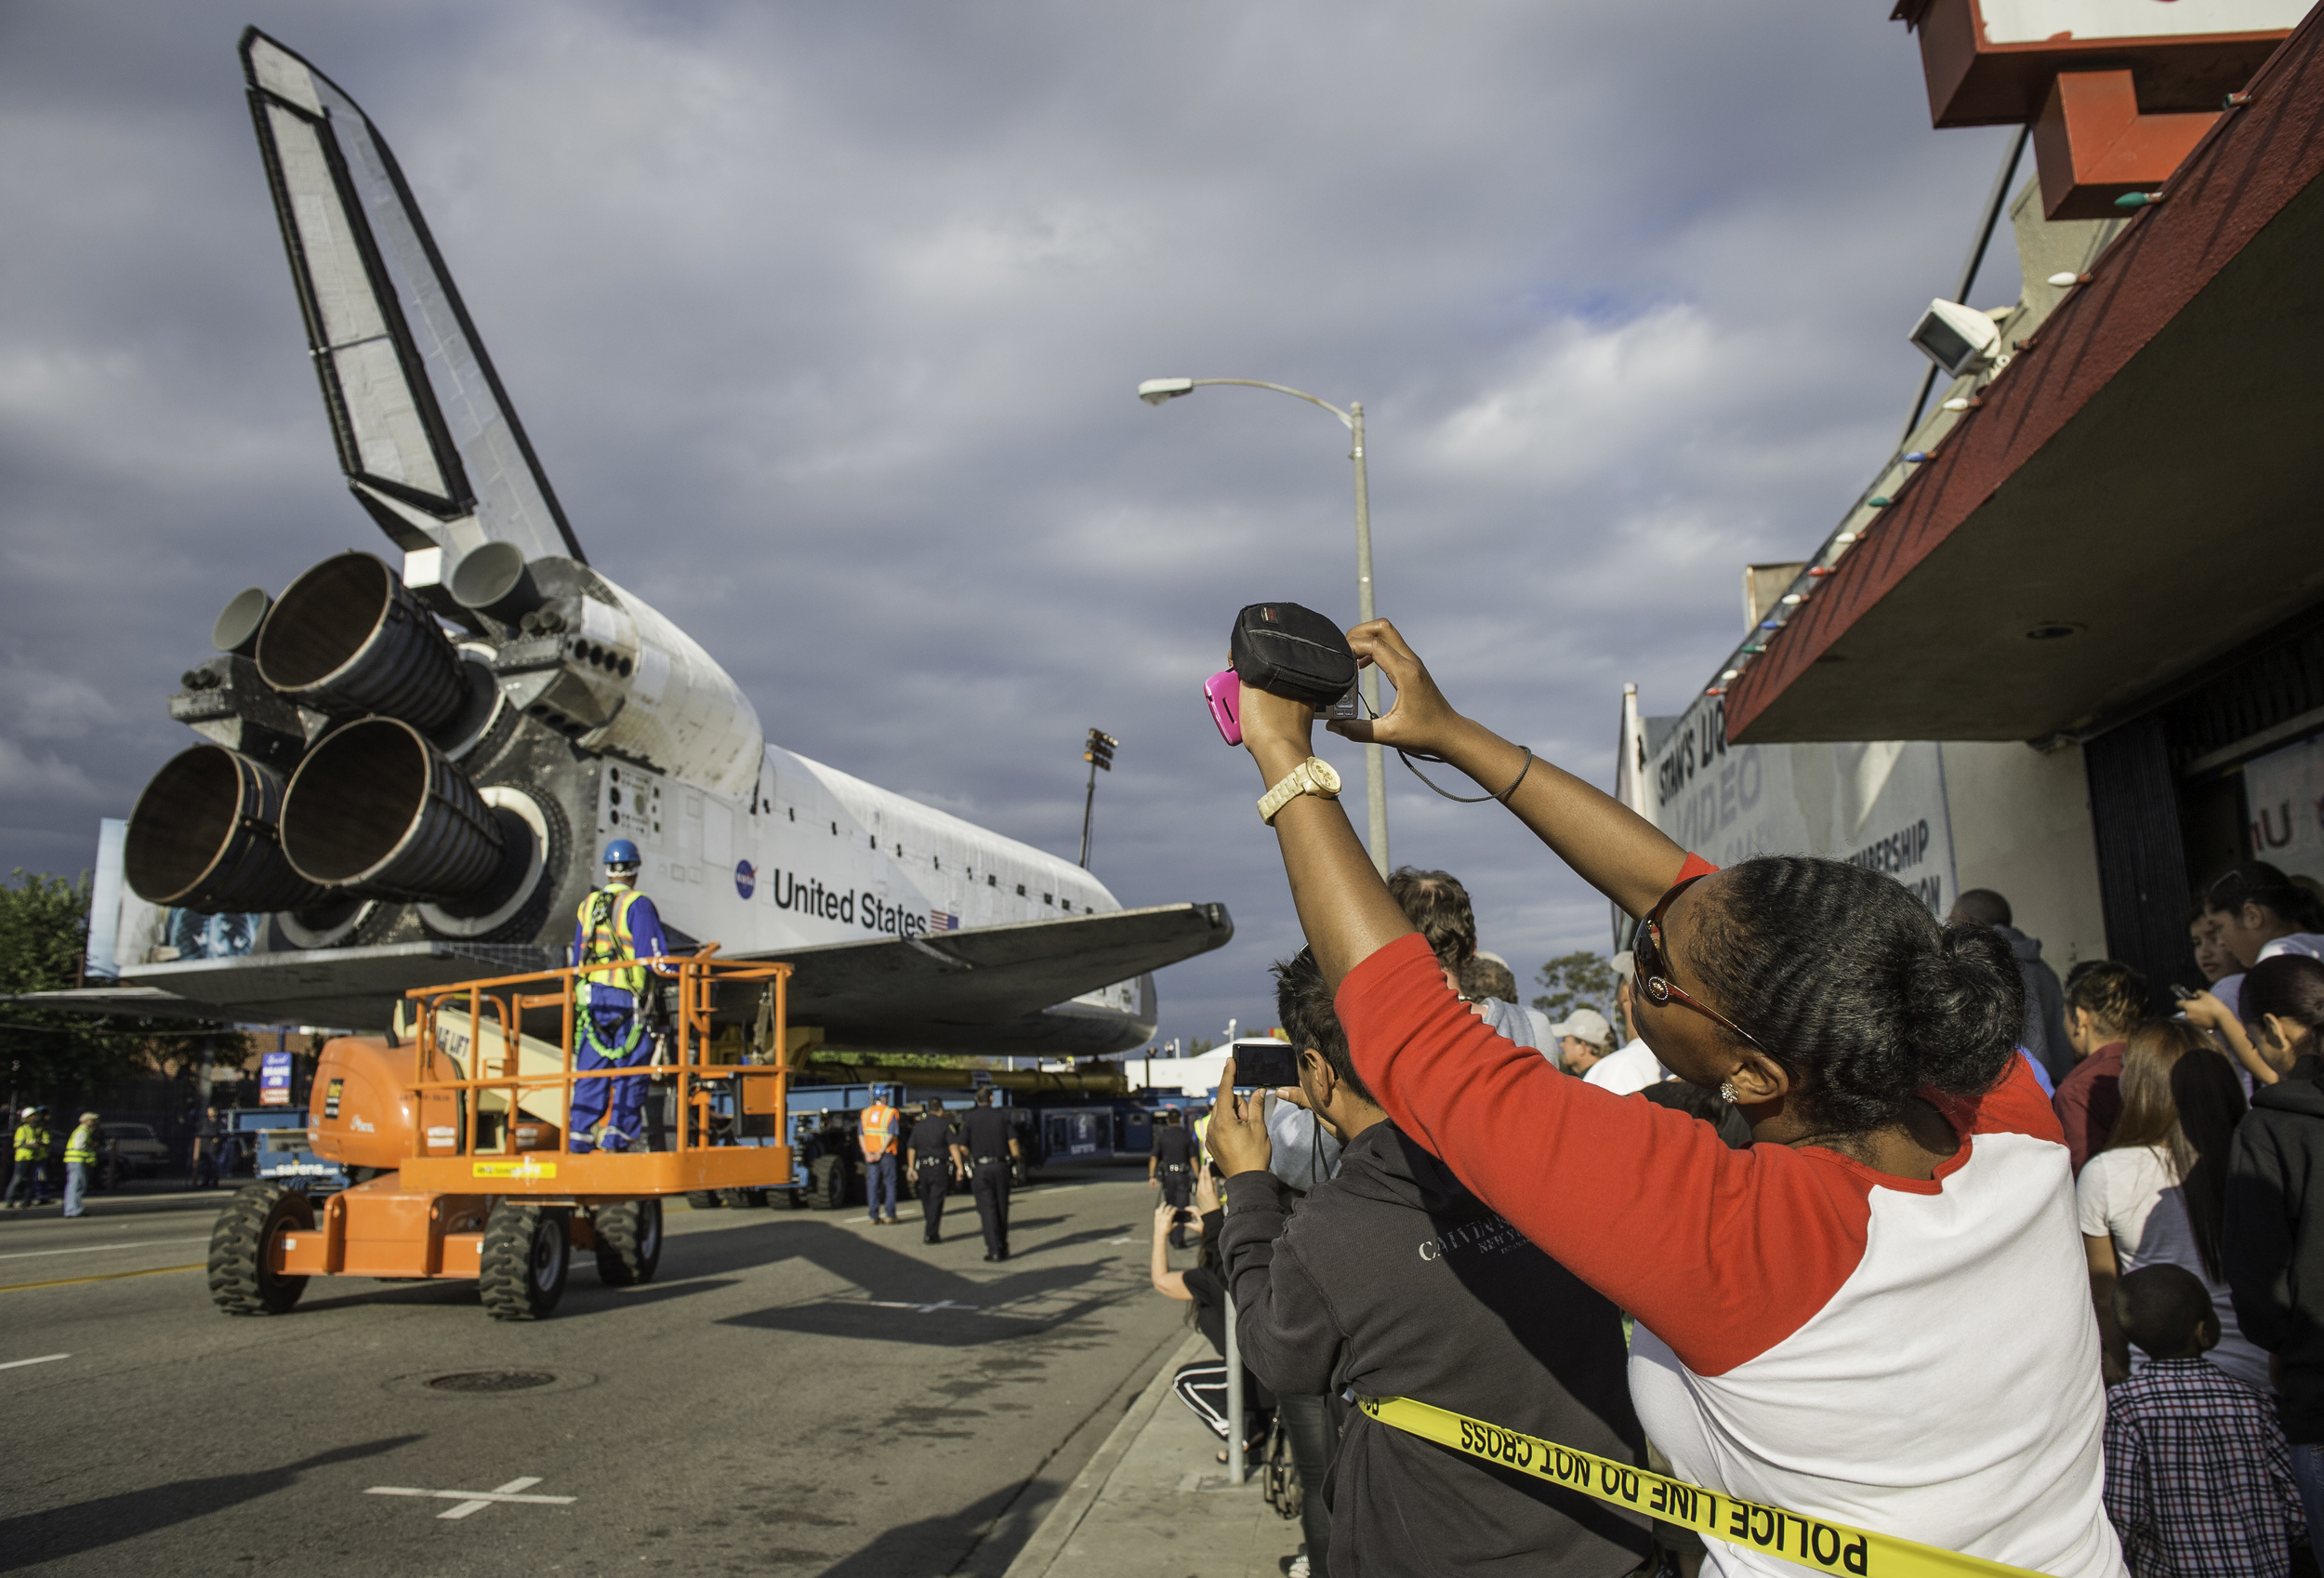  Spectators are seen photographing space shuttle Endeavour as it passes by on its way to its new home at the California Science Center, Friday, Oct. 12, 2012, in Inglewood. Endeavour, built as a replacement for space shuttle Challenger, completed 25 